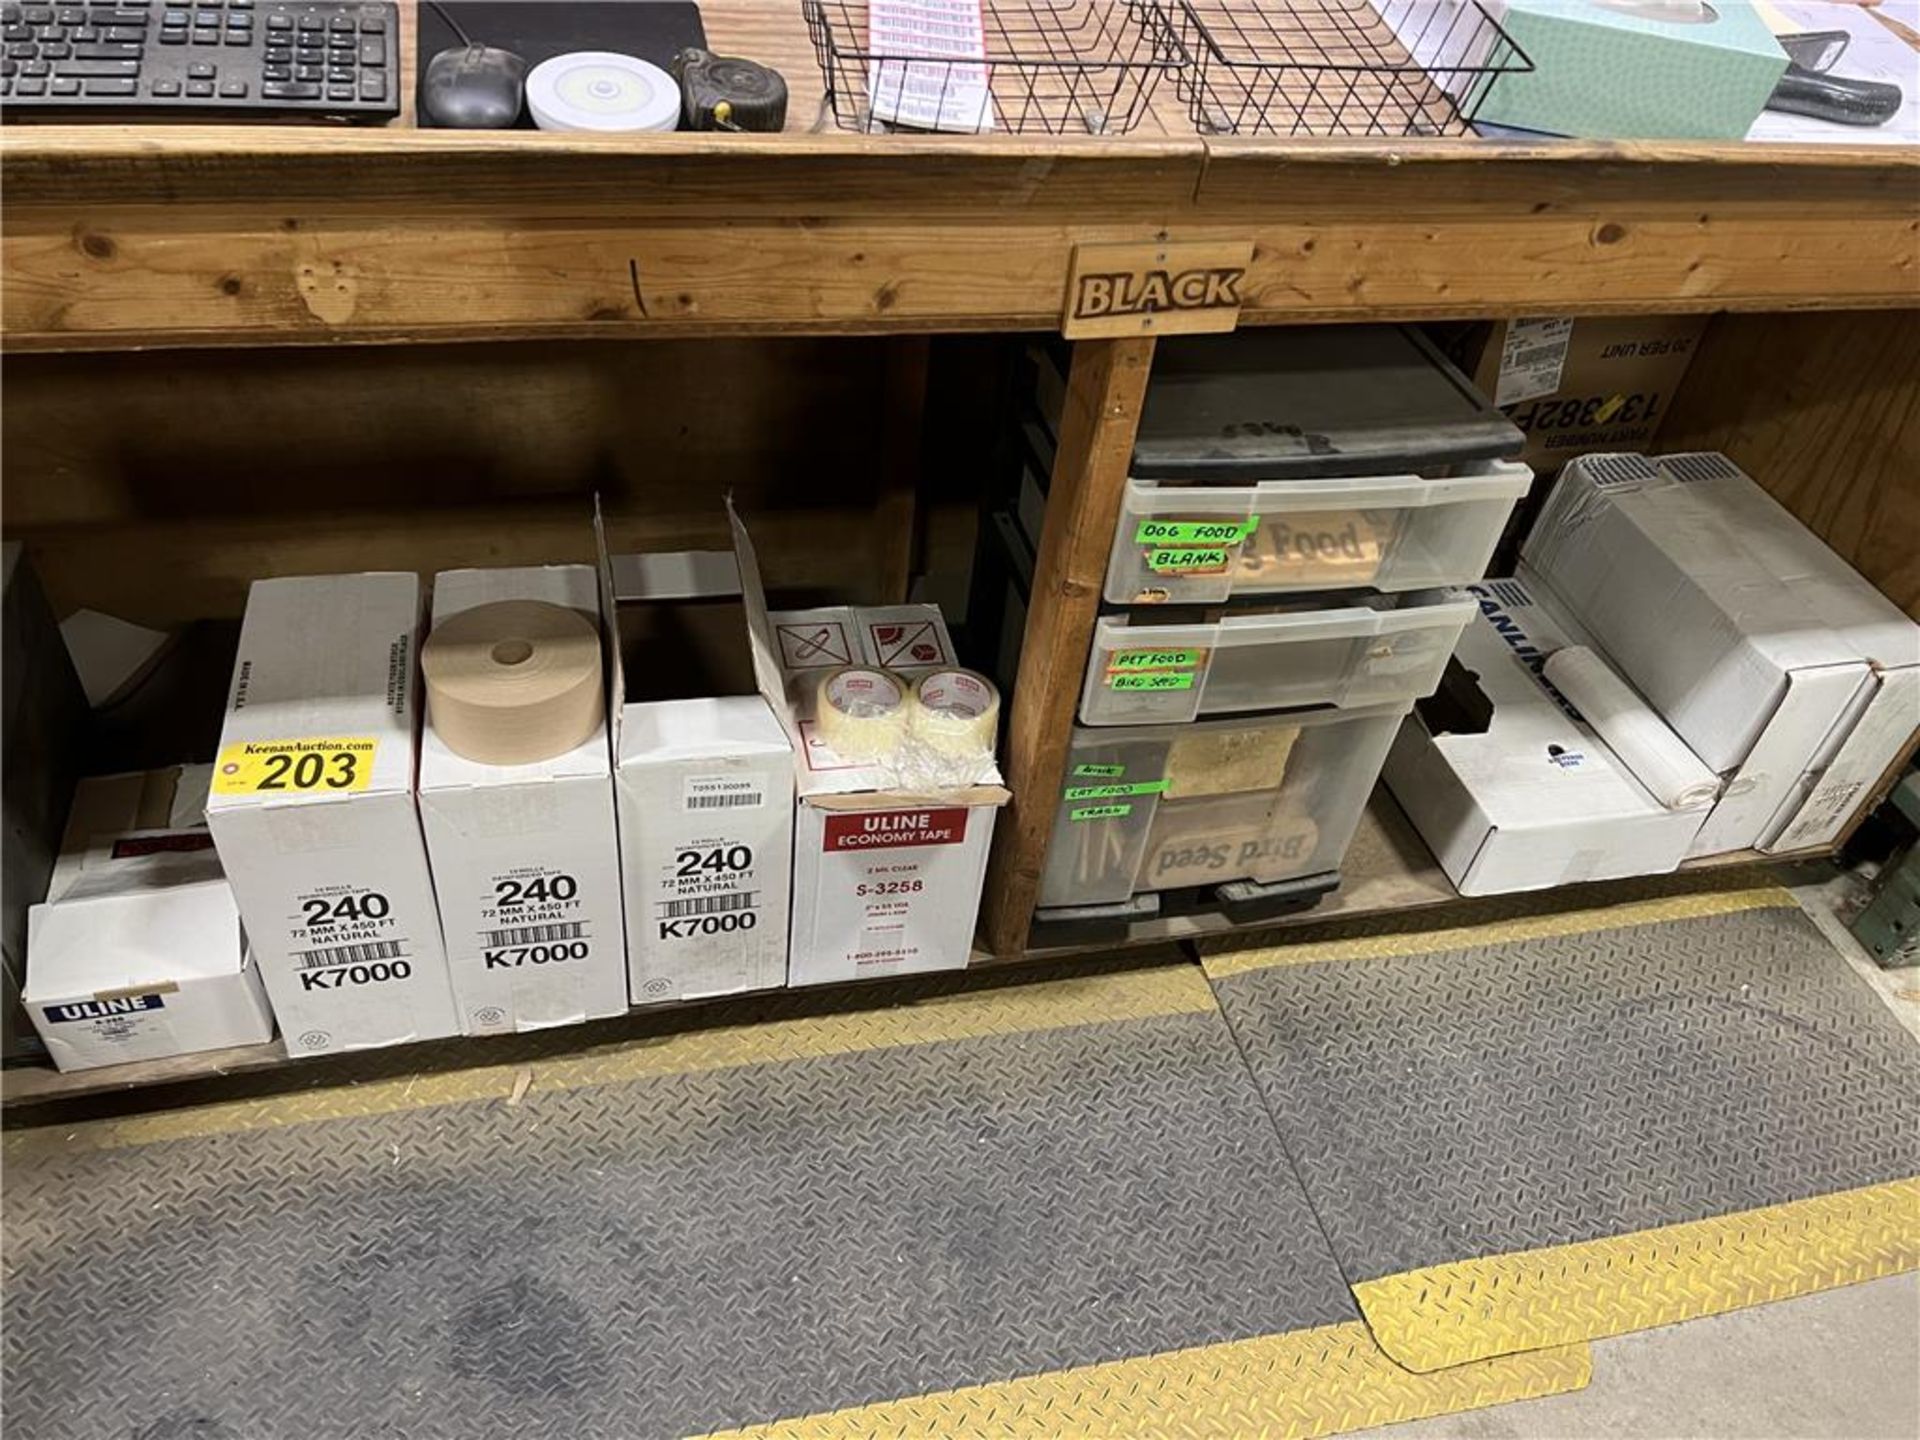 LOT: SHIPPING LABELS, BOX TAPE, 2.5-CASES OF CAN LINERS, 3-DRAWER PLASTIC STORAGE CABINET